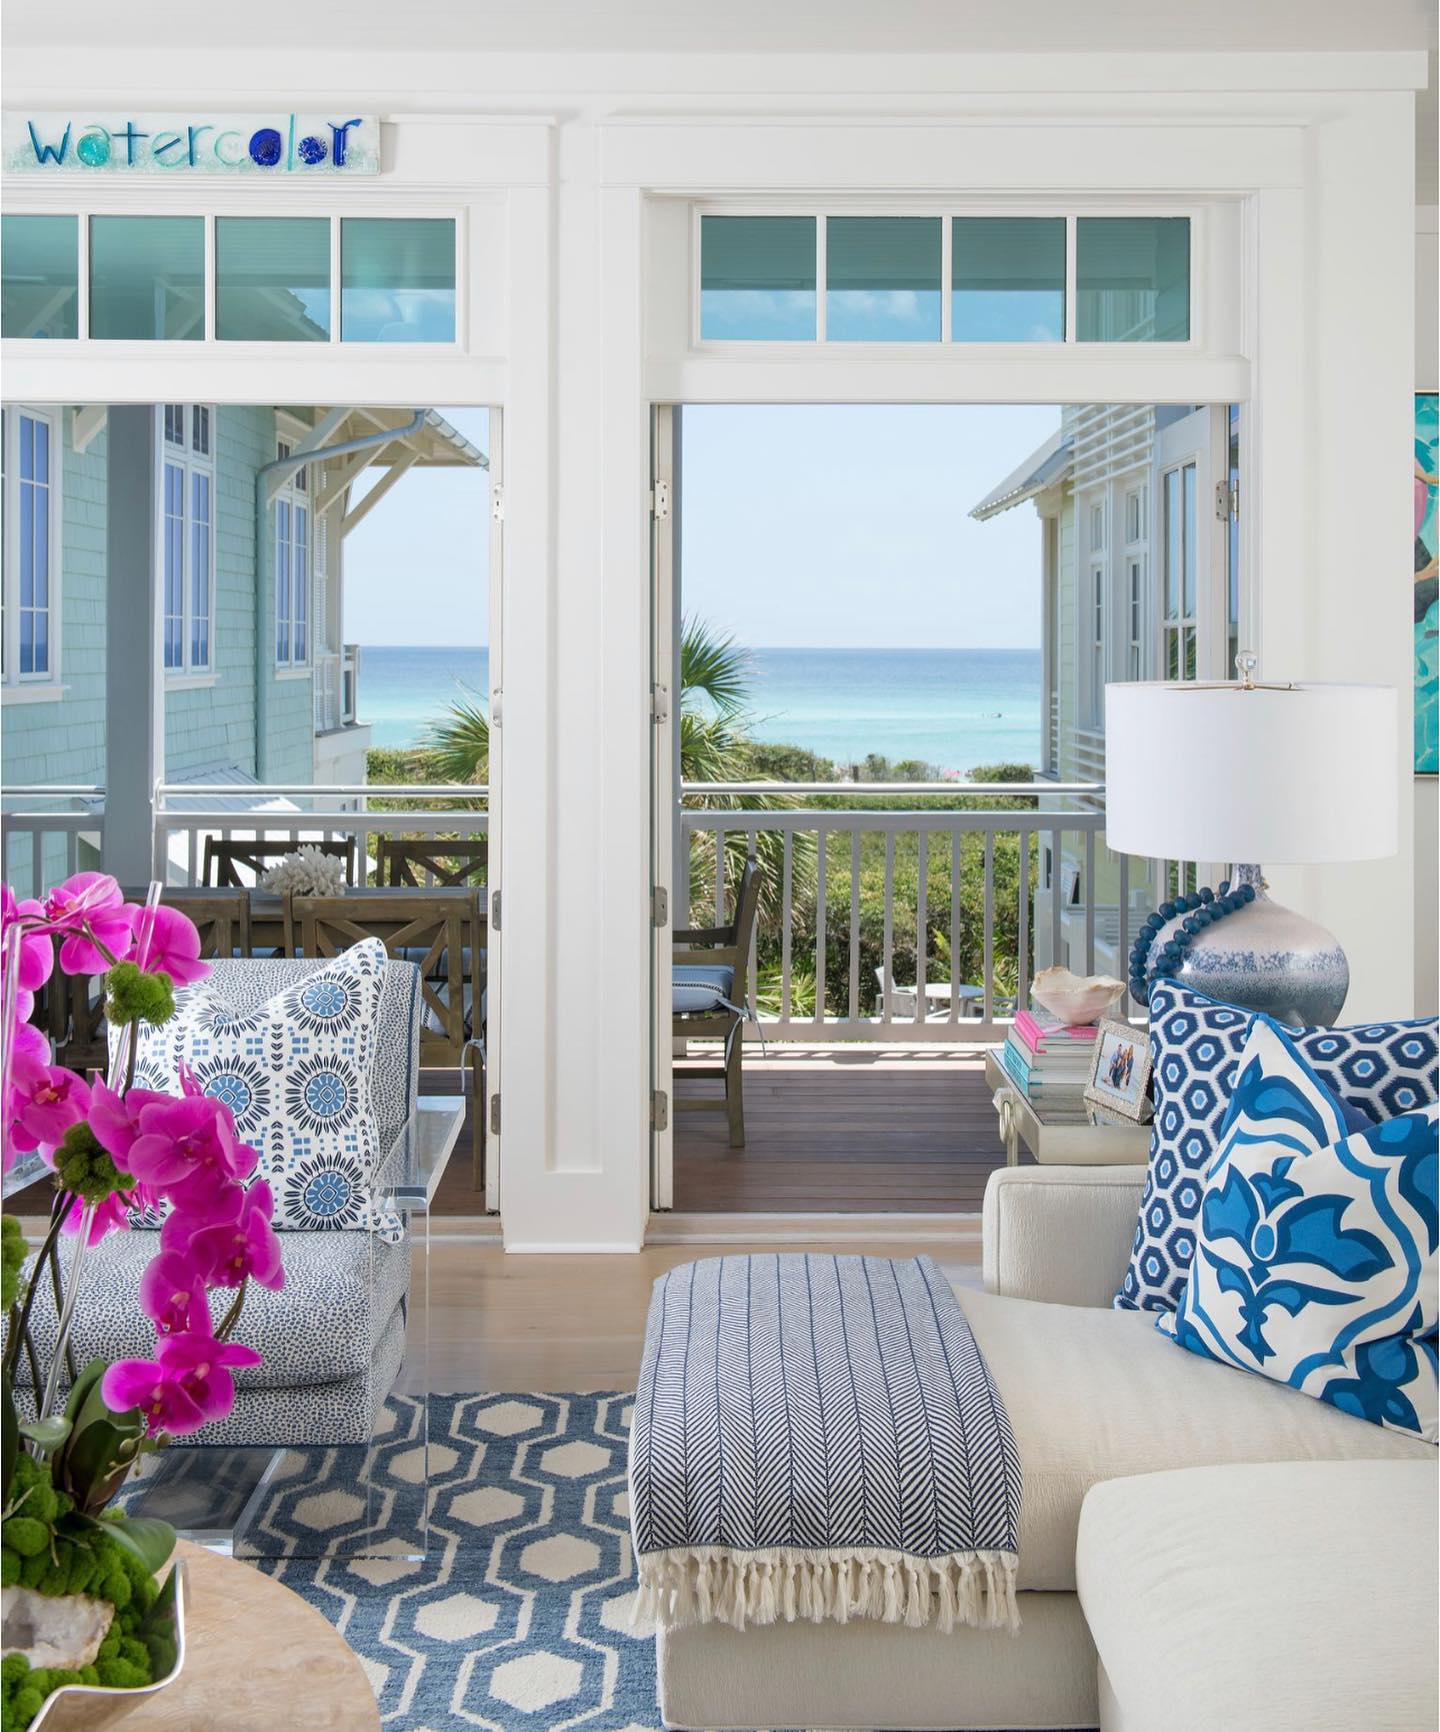 Life is better at the beach 🏝💙💕. See more of this vacation home on #30A is the #springissue of #IBBatHome. View online or pick up a copy at our store in #Frisco. All furnishings & decor available through our store in Frisco. #designmagazine #beachhouse #lifeisbetteratthebeach #travelingdesigner #beachhousedecor #Floridadesign #30Astyle #vacationhomedesign #beachinteriors #teamIBB #ibbdesign